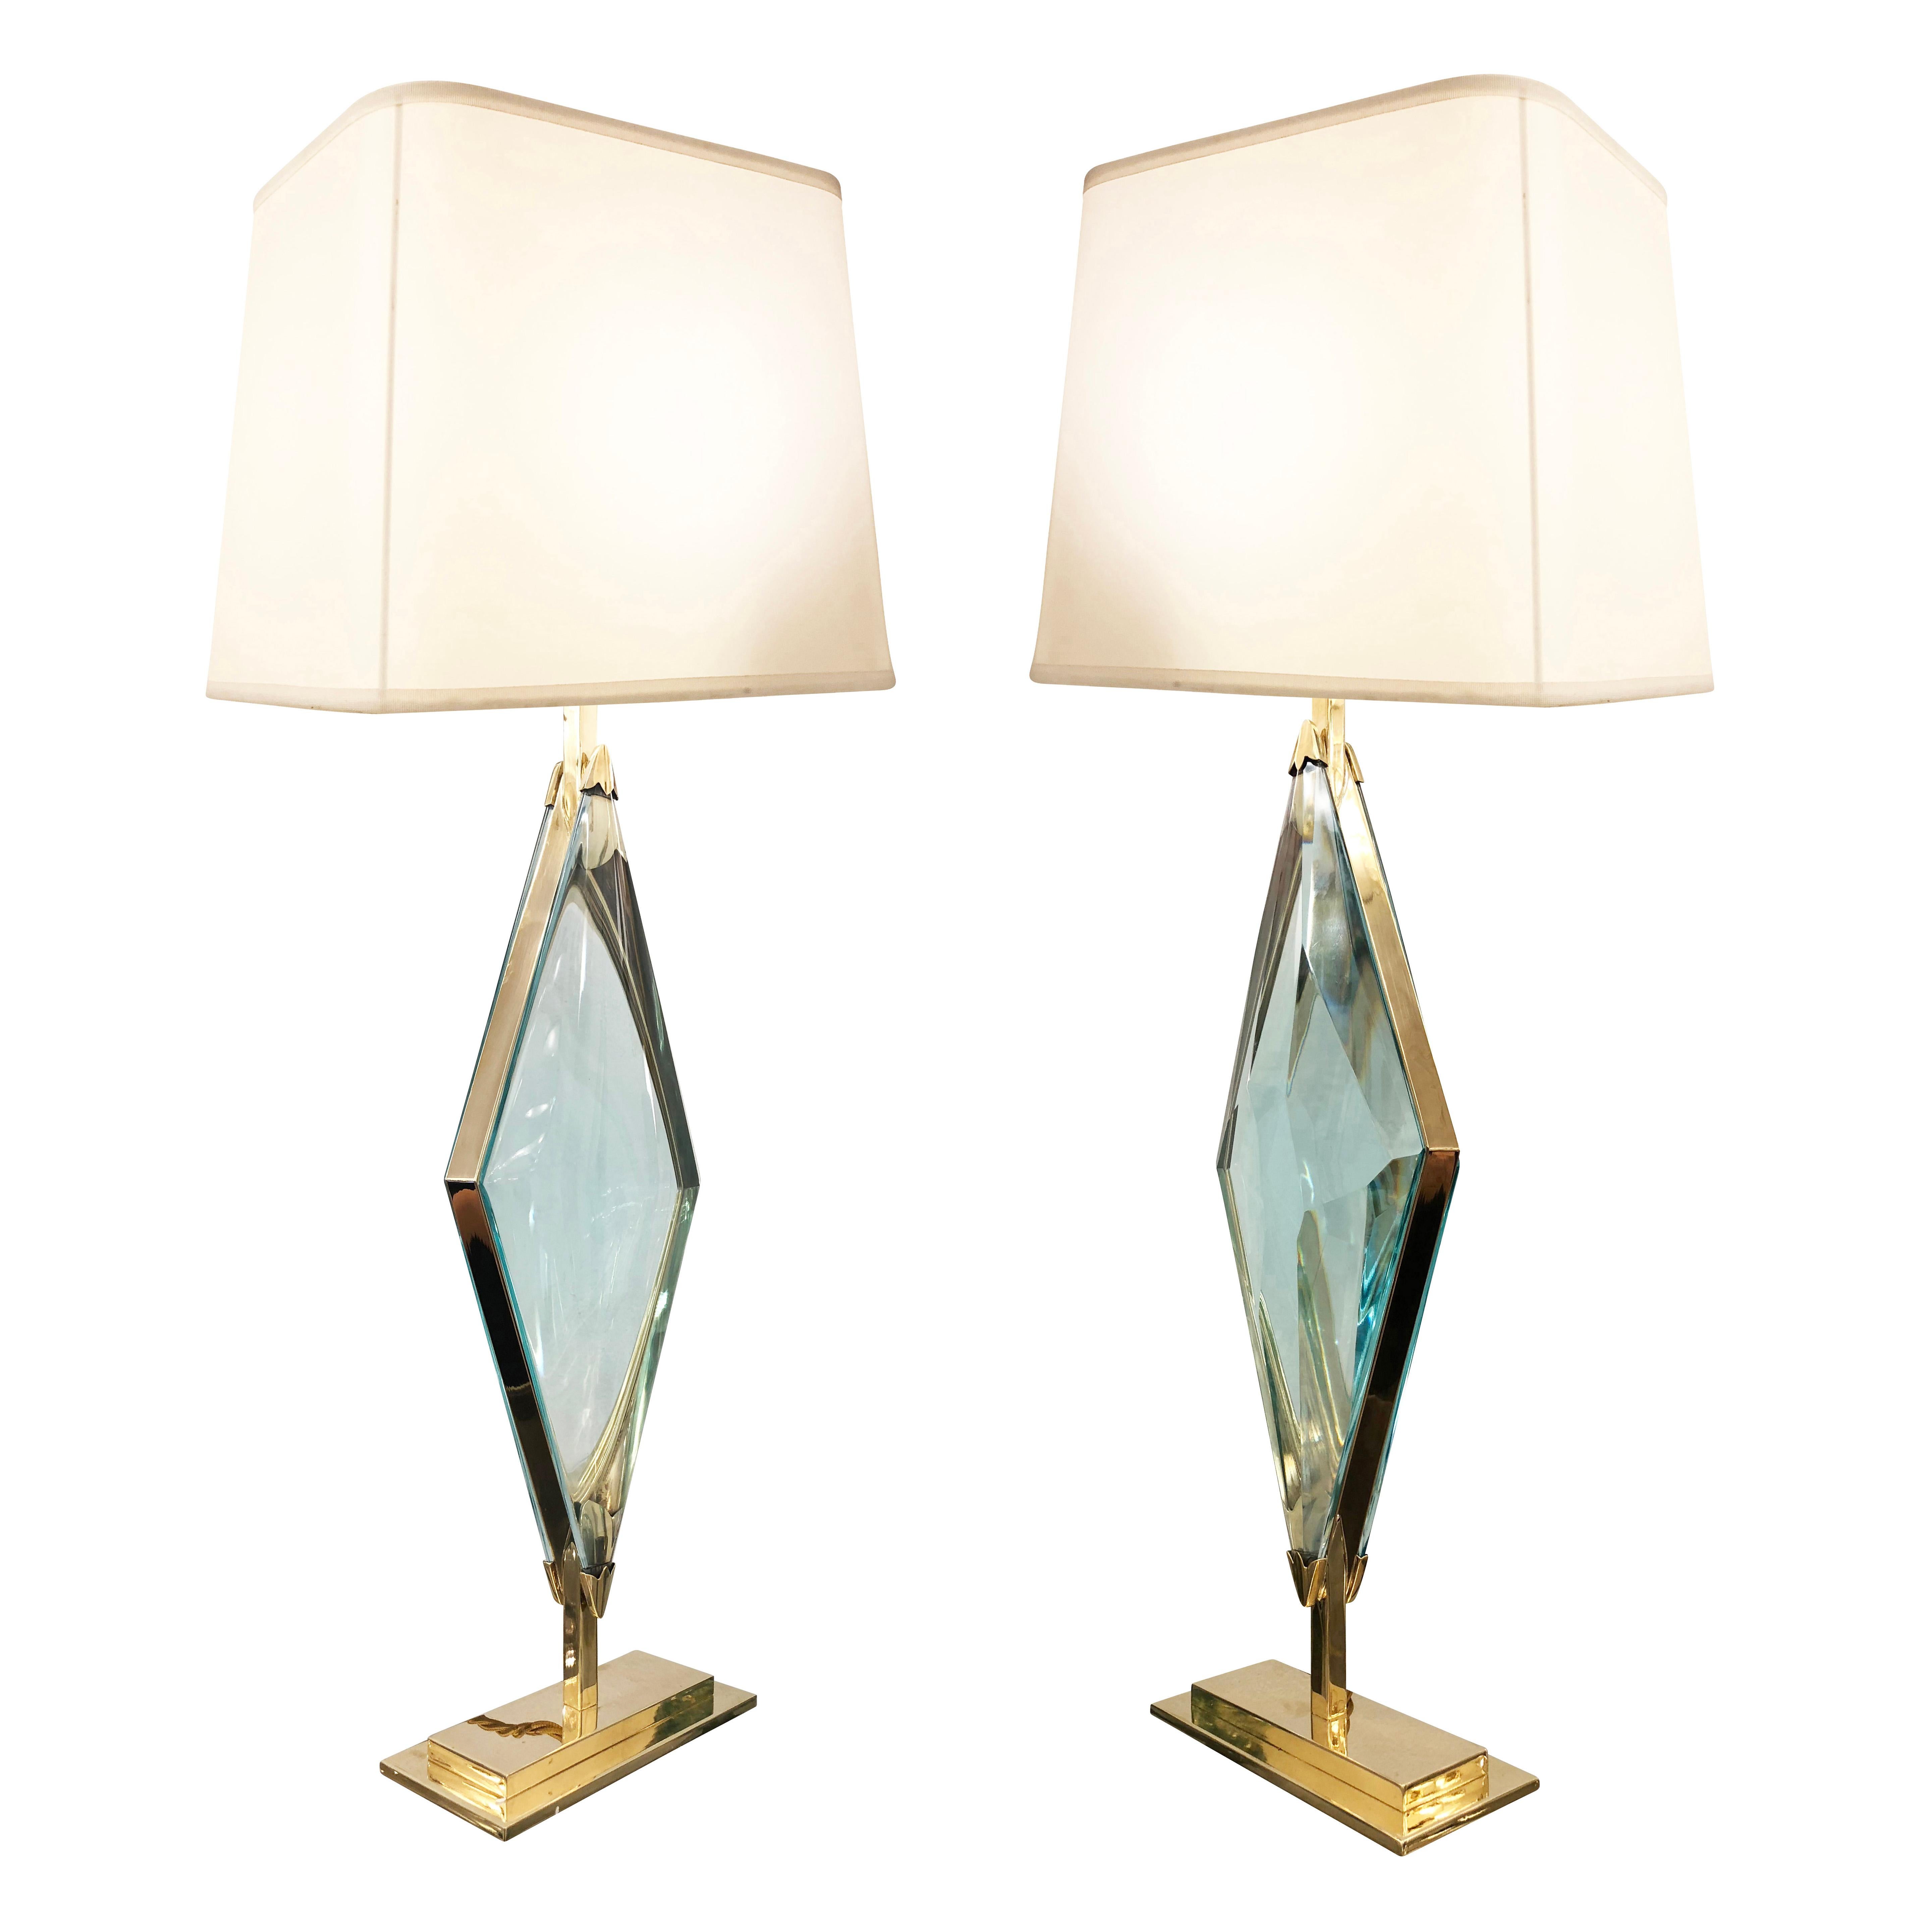 Rombo Table Lamps by formA by Gaspare Asaro